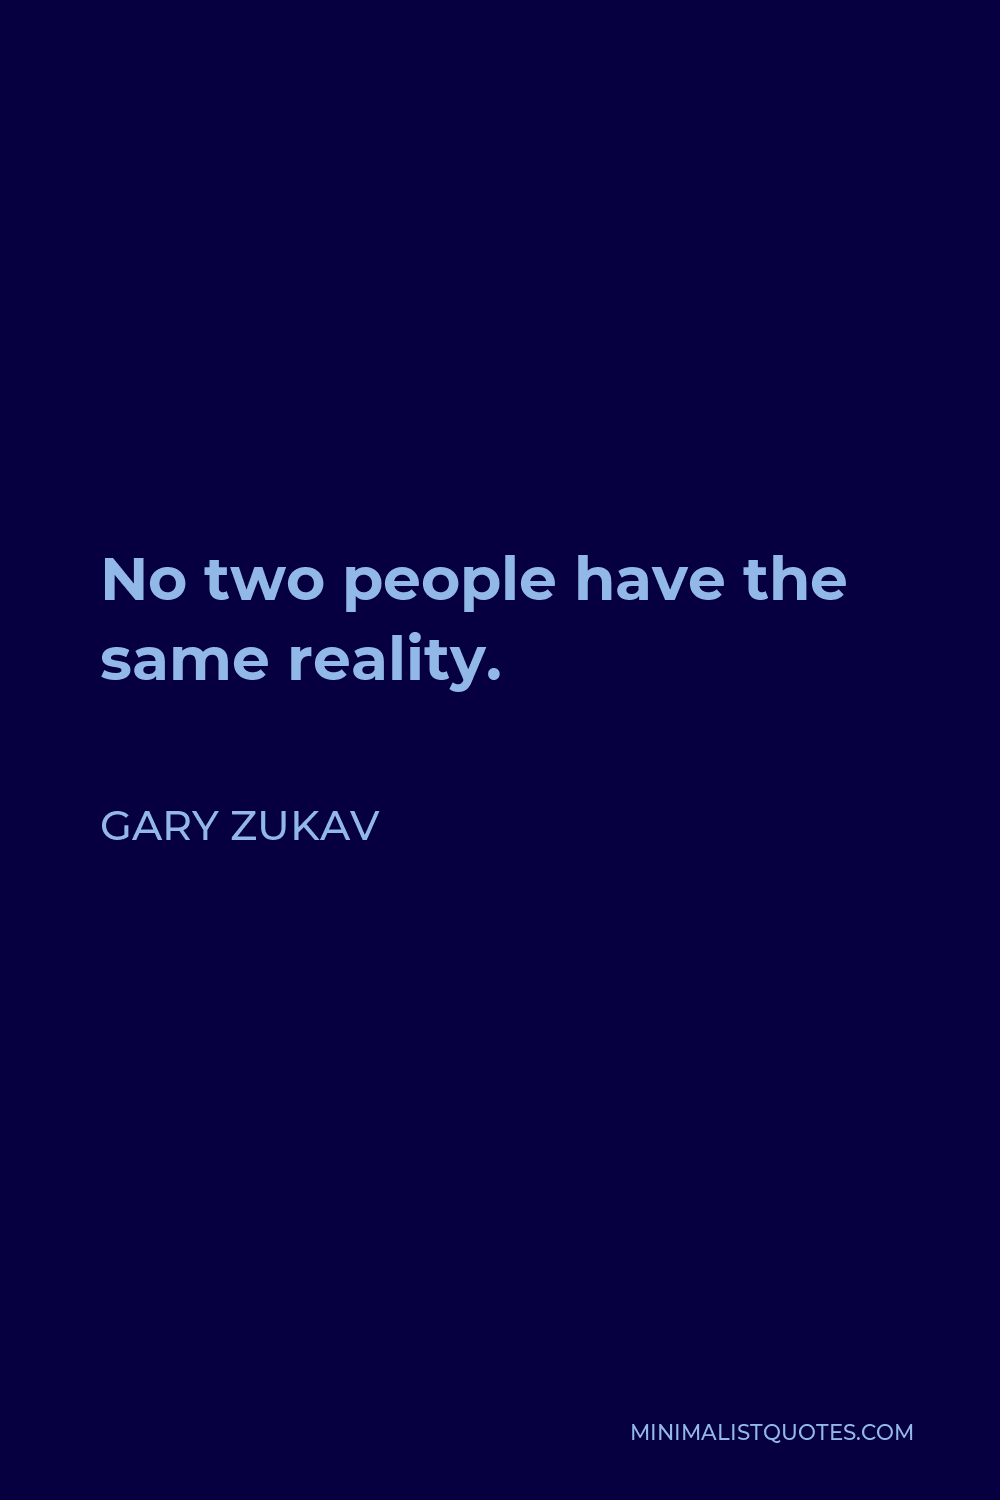 Gary Zukav Quote - No two people have the same reality.